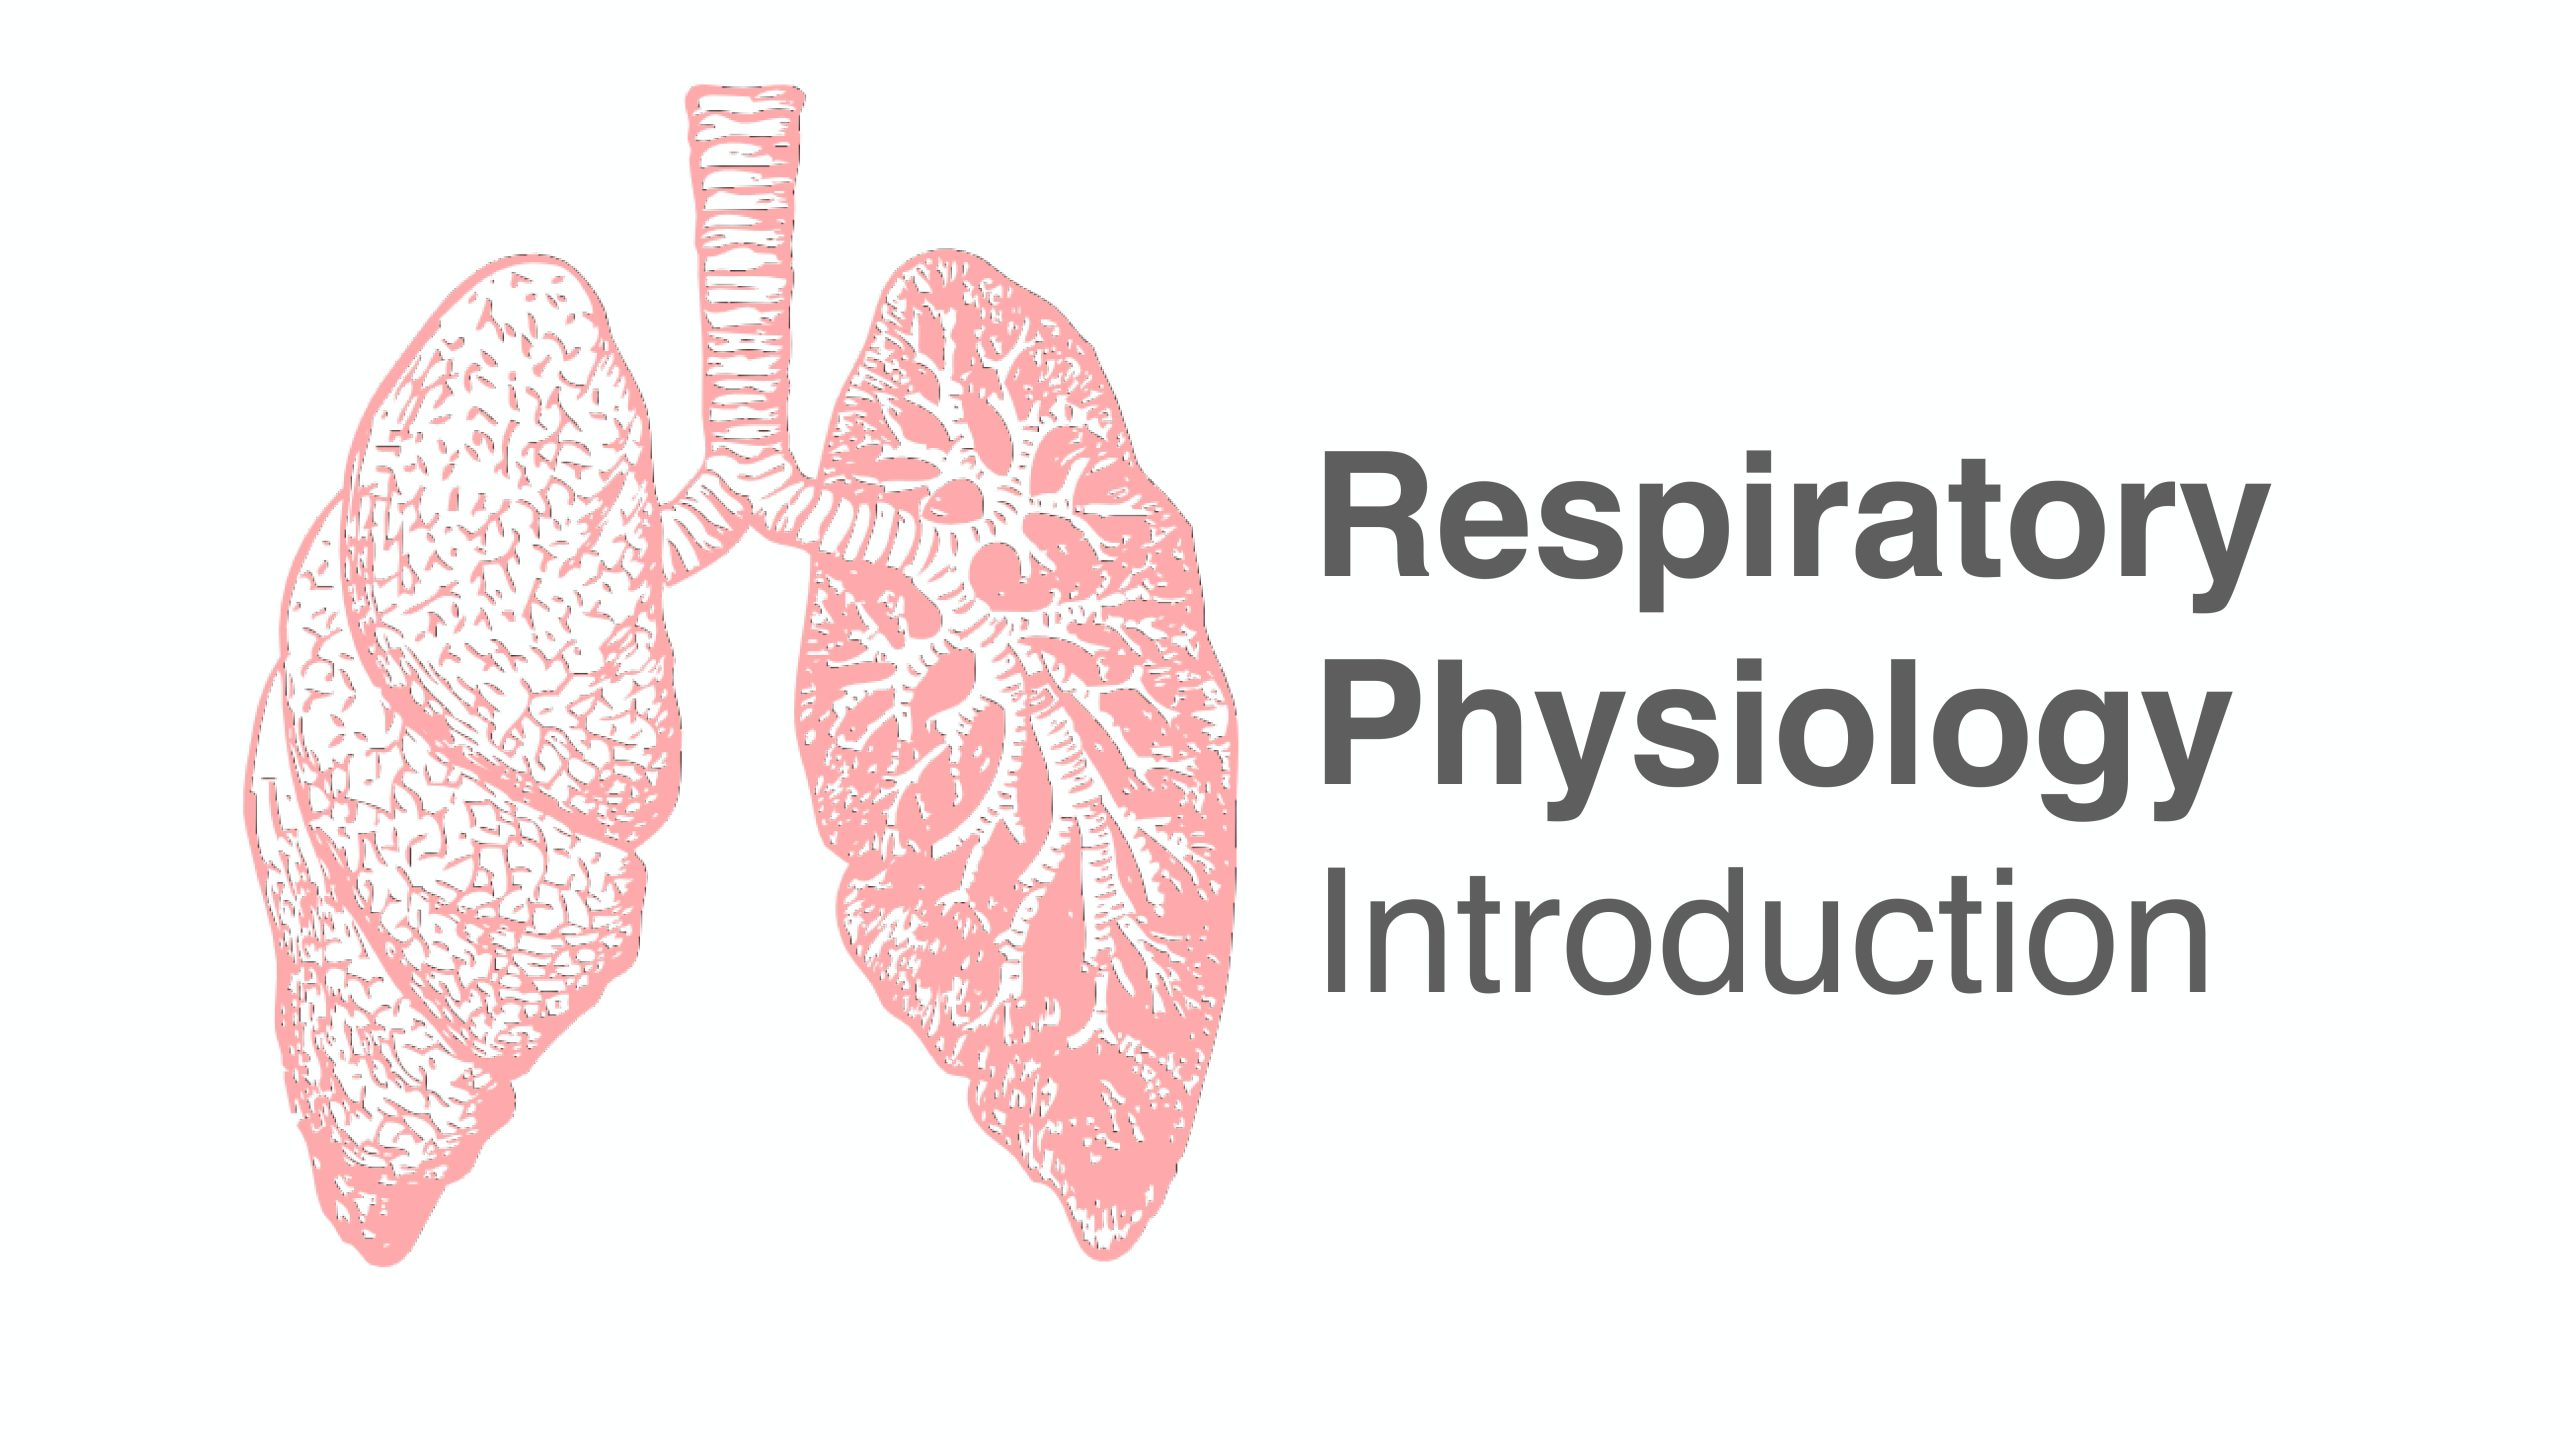 1. Respiratory Physiology Introduction